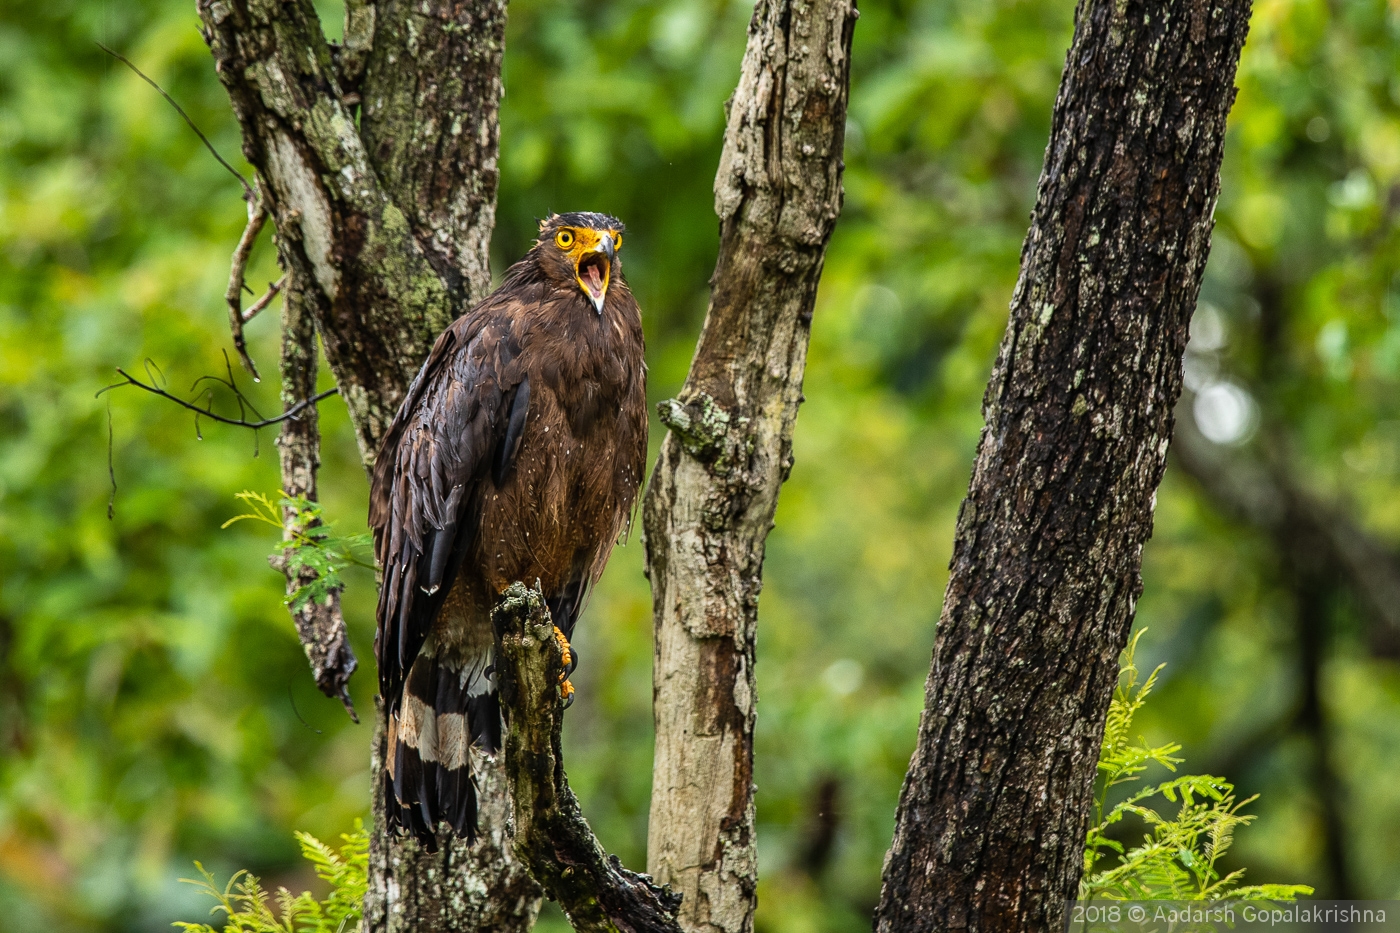 Crested Serpent Eagle, Kabini forest , India by Aadarsh Gopalakrishna